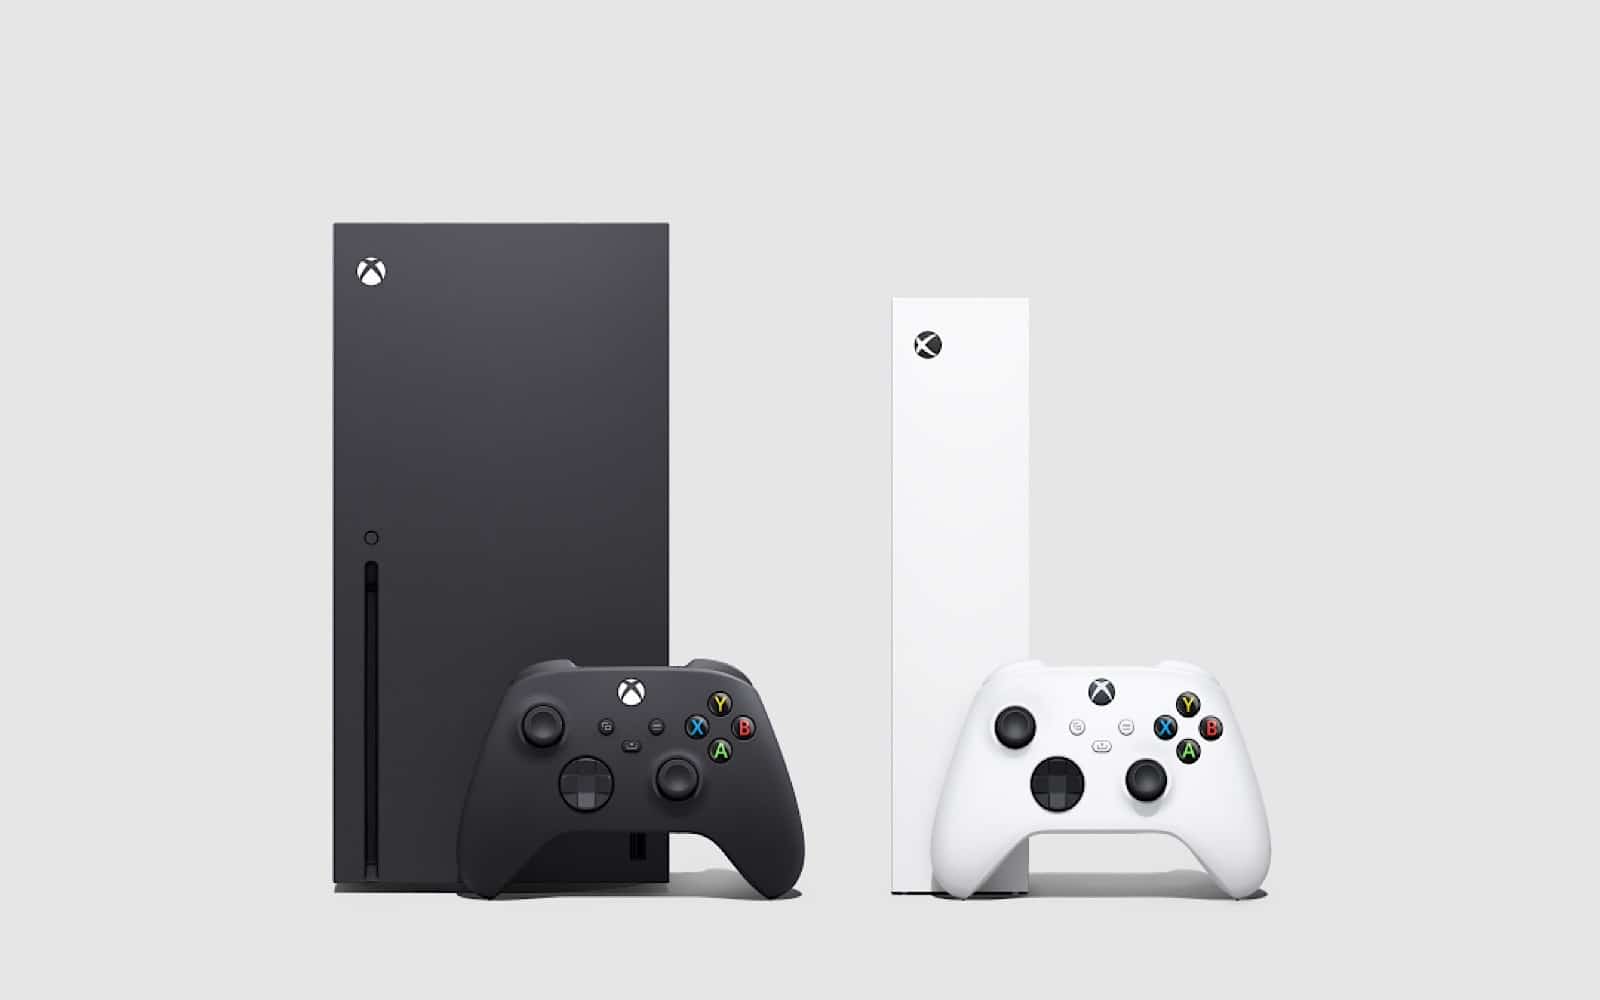 The Xbox Series X (left) next to the Xbox Series S (right)